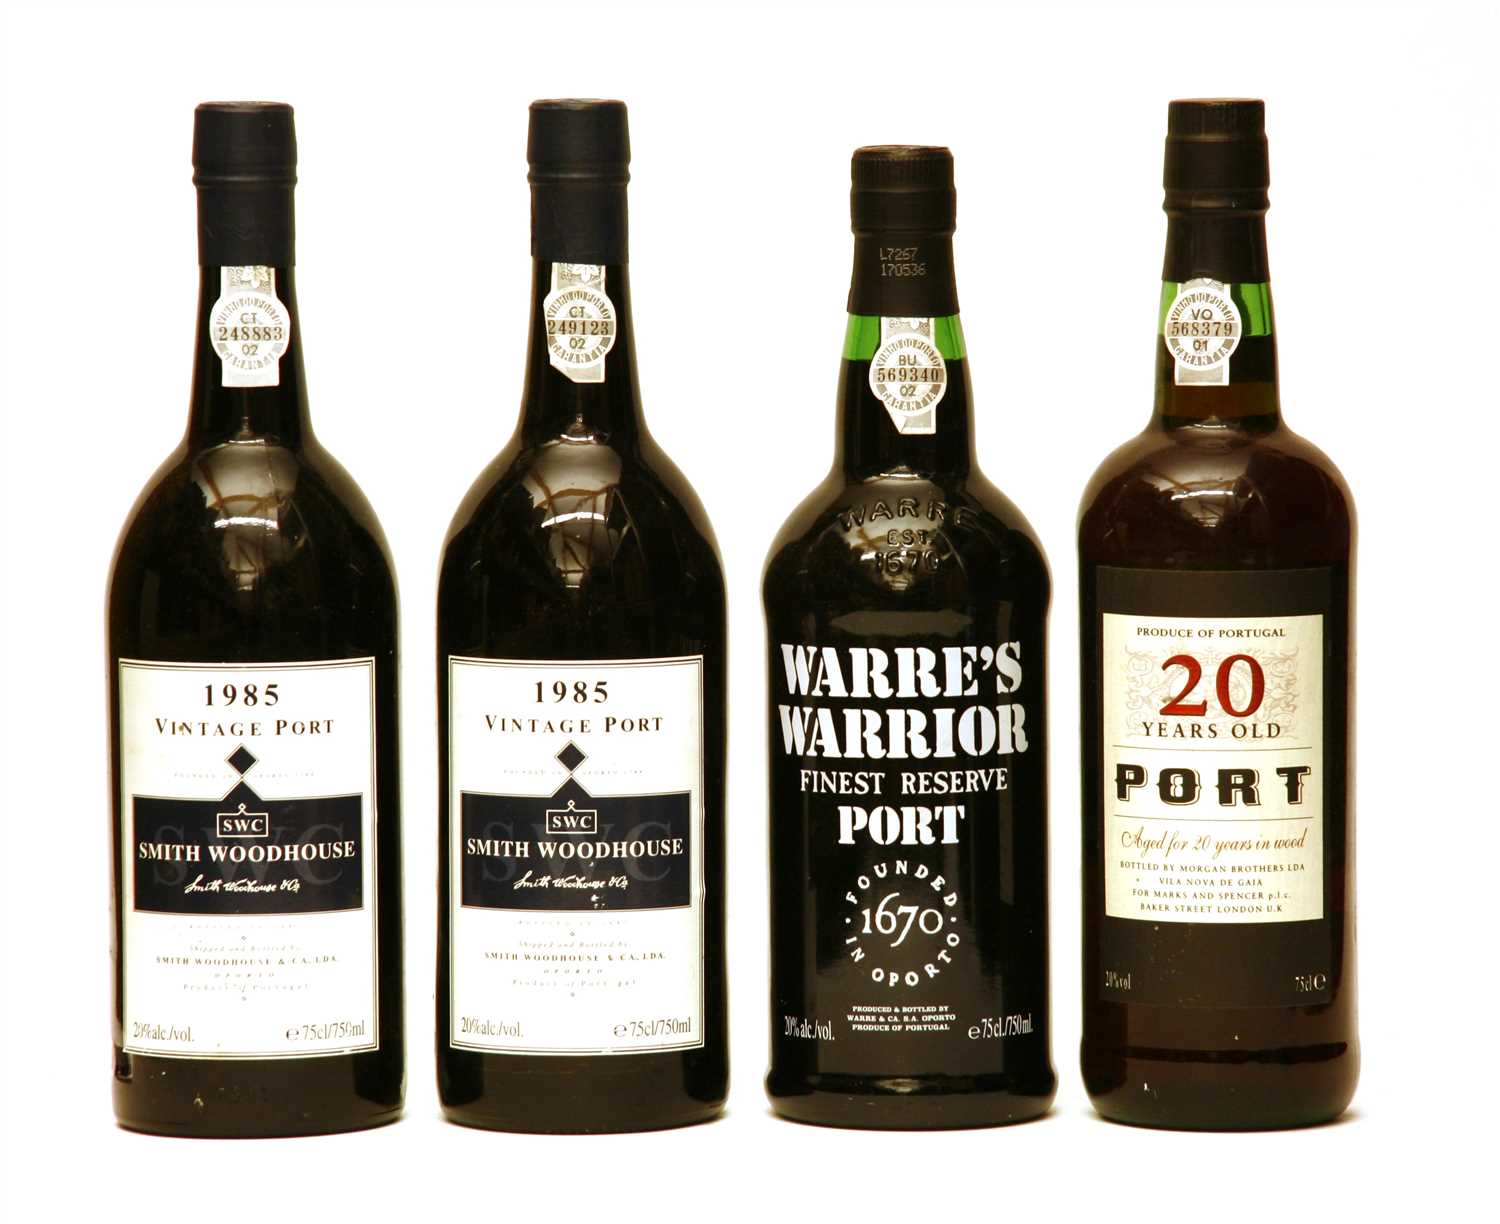 Lot 39 - Assorted Port: Smith Woodhouse, 1985, two bottles ;and three other bottles, four bottles in total